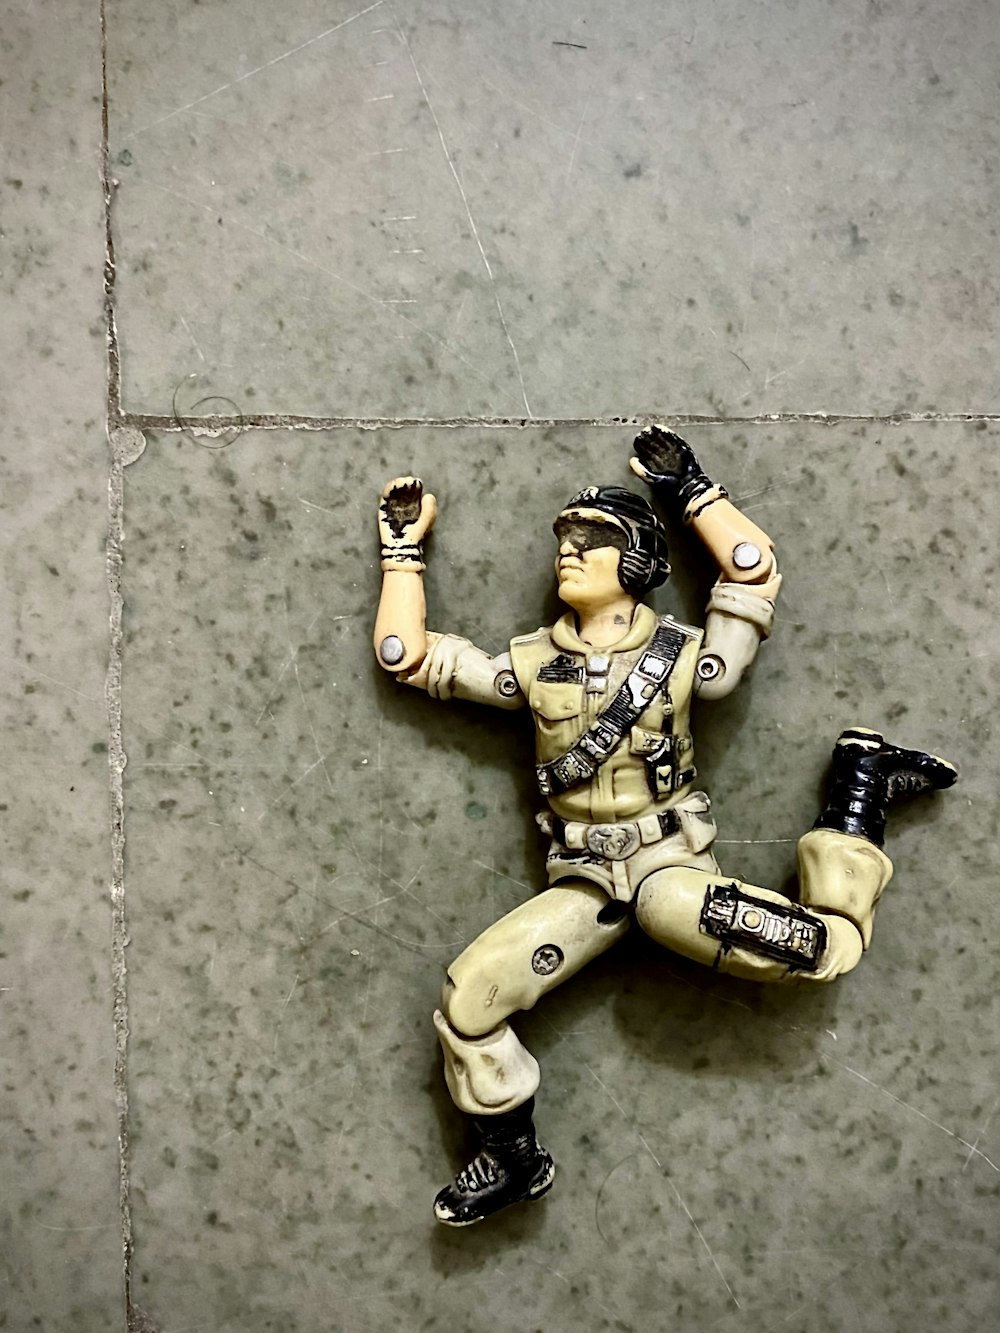 a toy figurine is laying on the ground